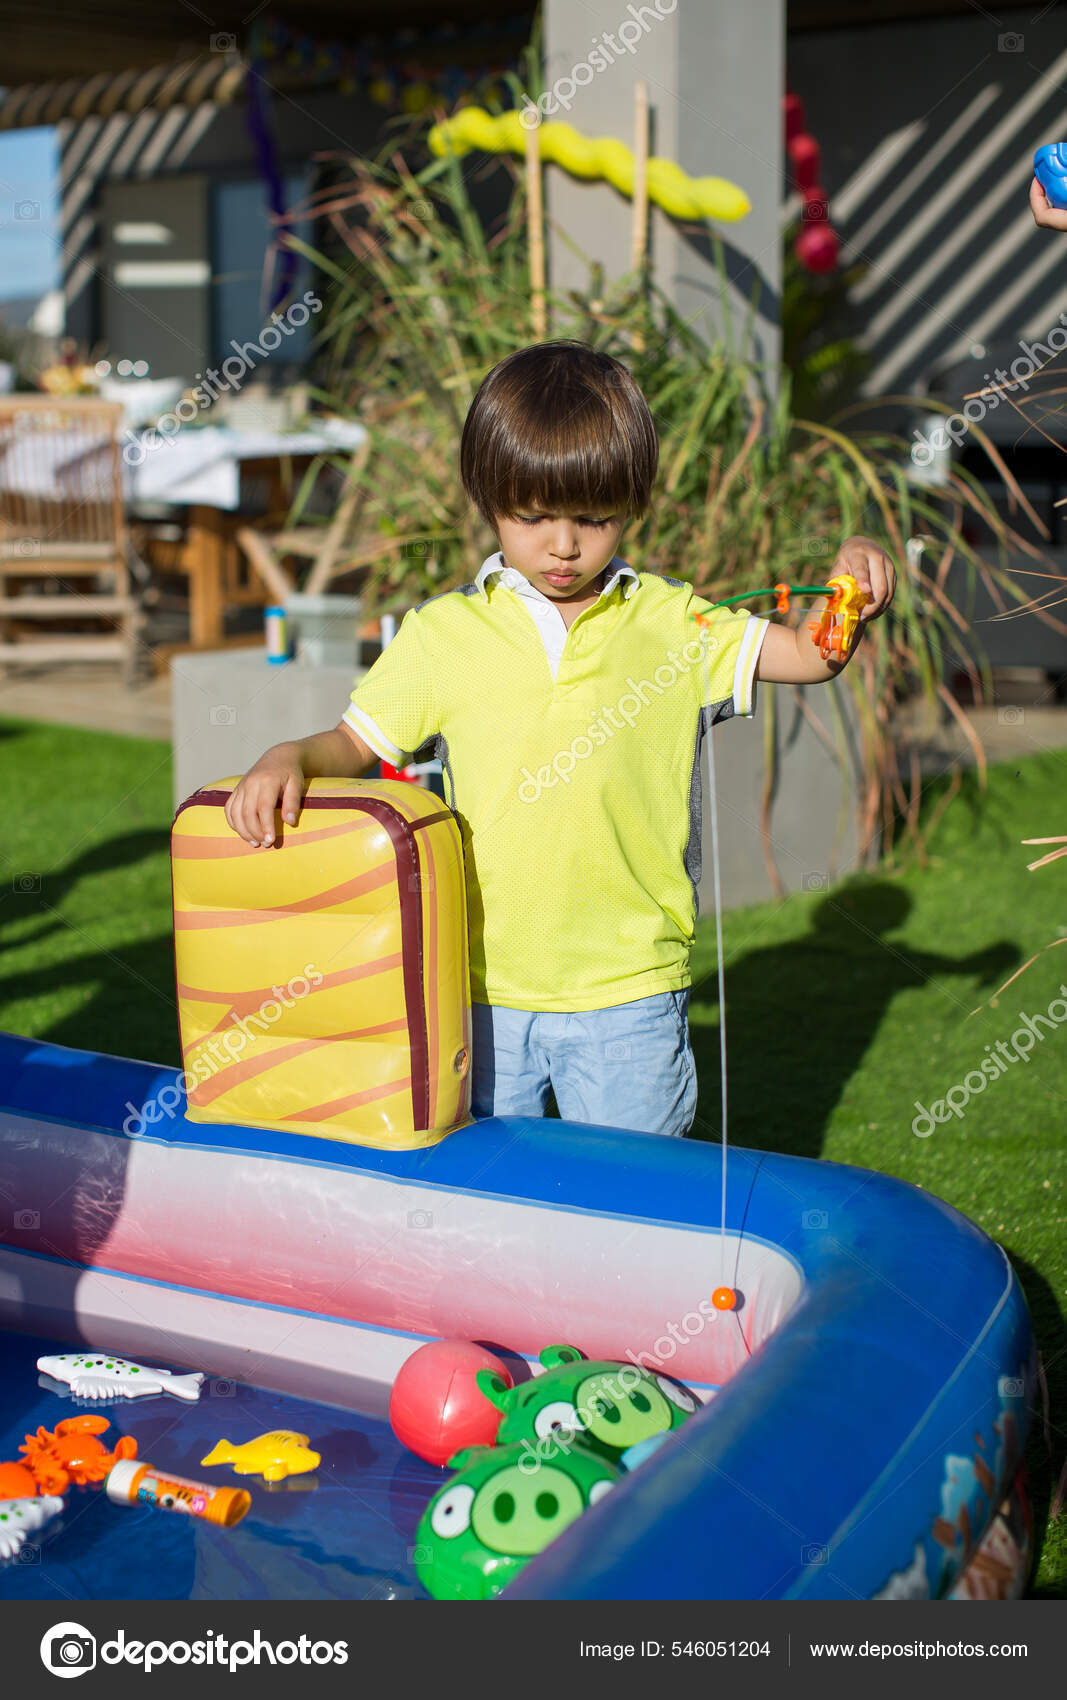 Fishing in the childrens pool. Little boys games Stock Photo by